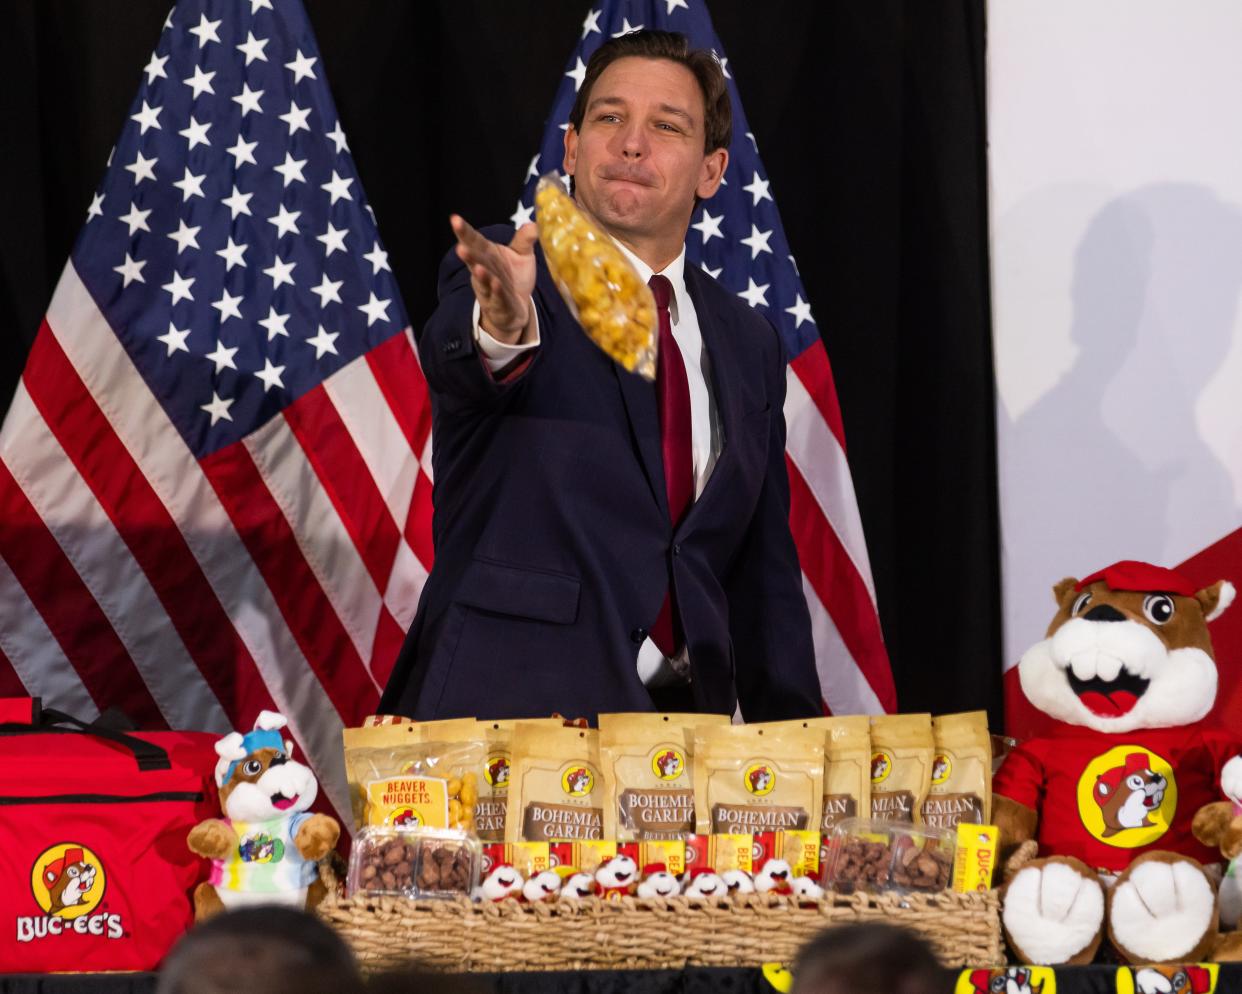 Florida Gov. Ron DeSantis throws bags of Buc-ee's to people attending his press conference in Ocala on April 7. He visited Marion County to reveal that $4 million will be allocated by the state to build an Interstate 75 exchange. A Buc-ee's convenience store will be built nearby.